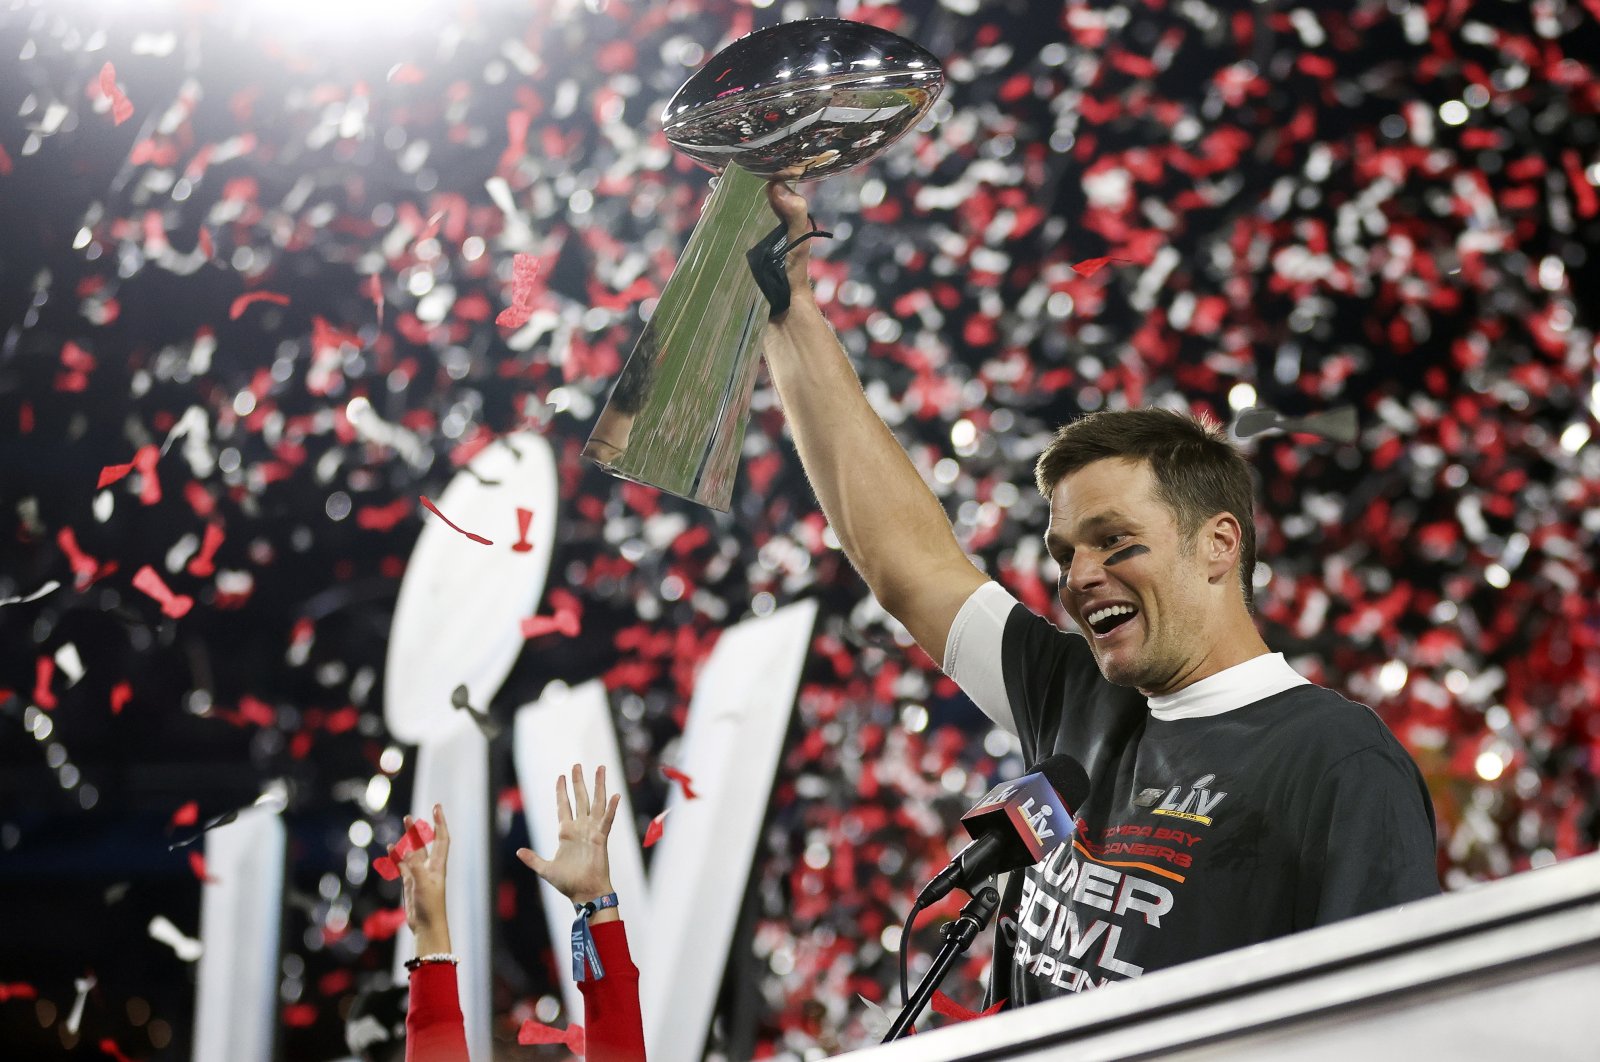 Tampa Bay Buccaneers quarterback Tom Brady (12) holds the Vince Lombardi trophy following the NFL Super Bowl 55 football game against the Kansas City Chiefs, Sunday, Feb. 7, 2021, in Tampa, Fla. Tampa Bay won 31-9. (Ben Liebenberg via AP)